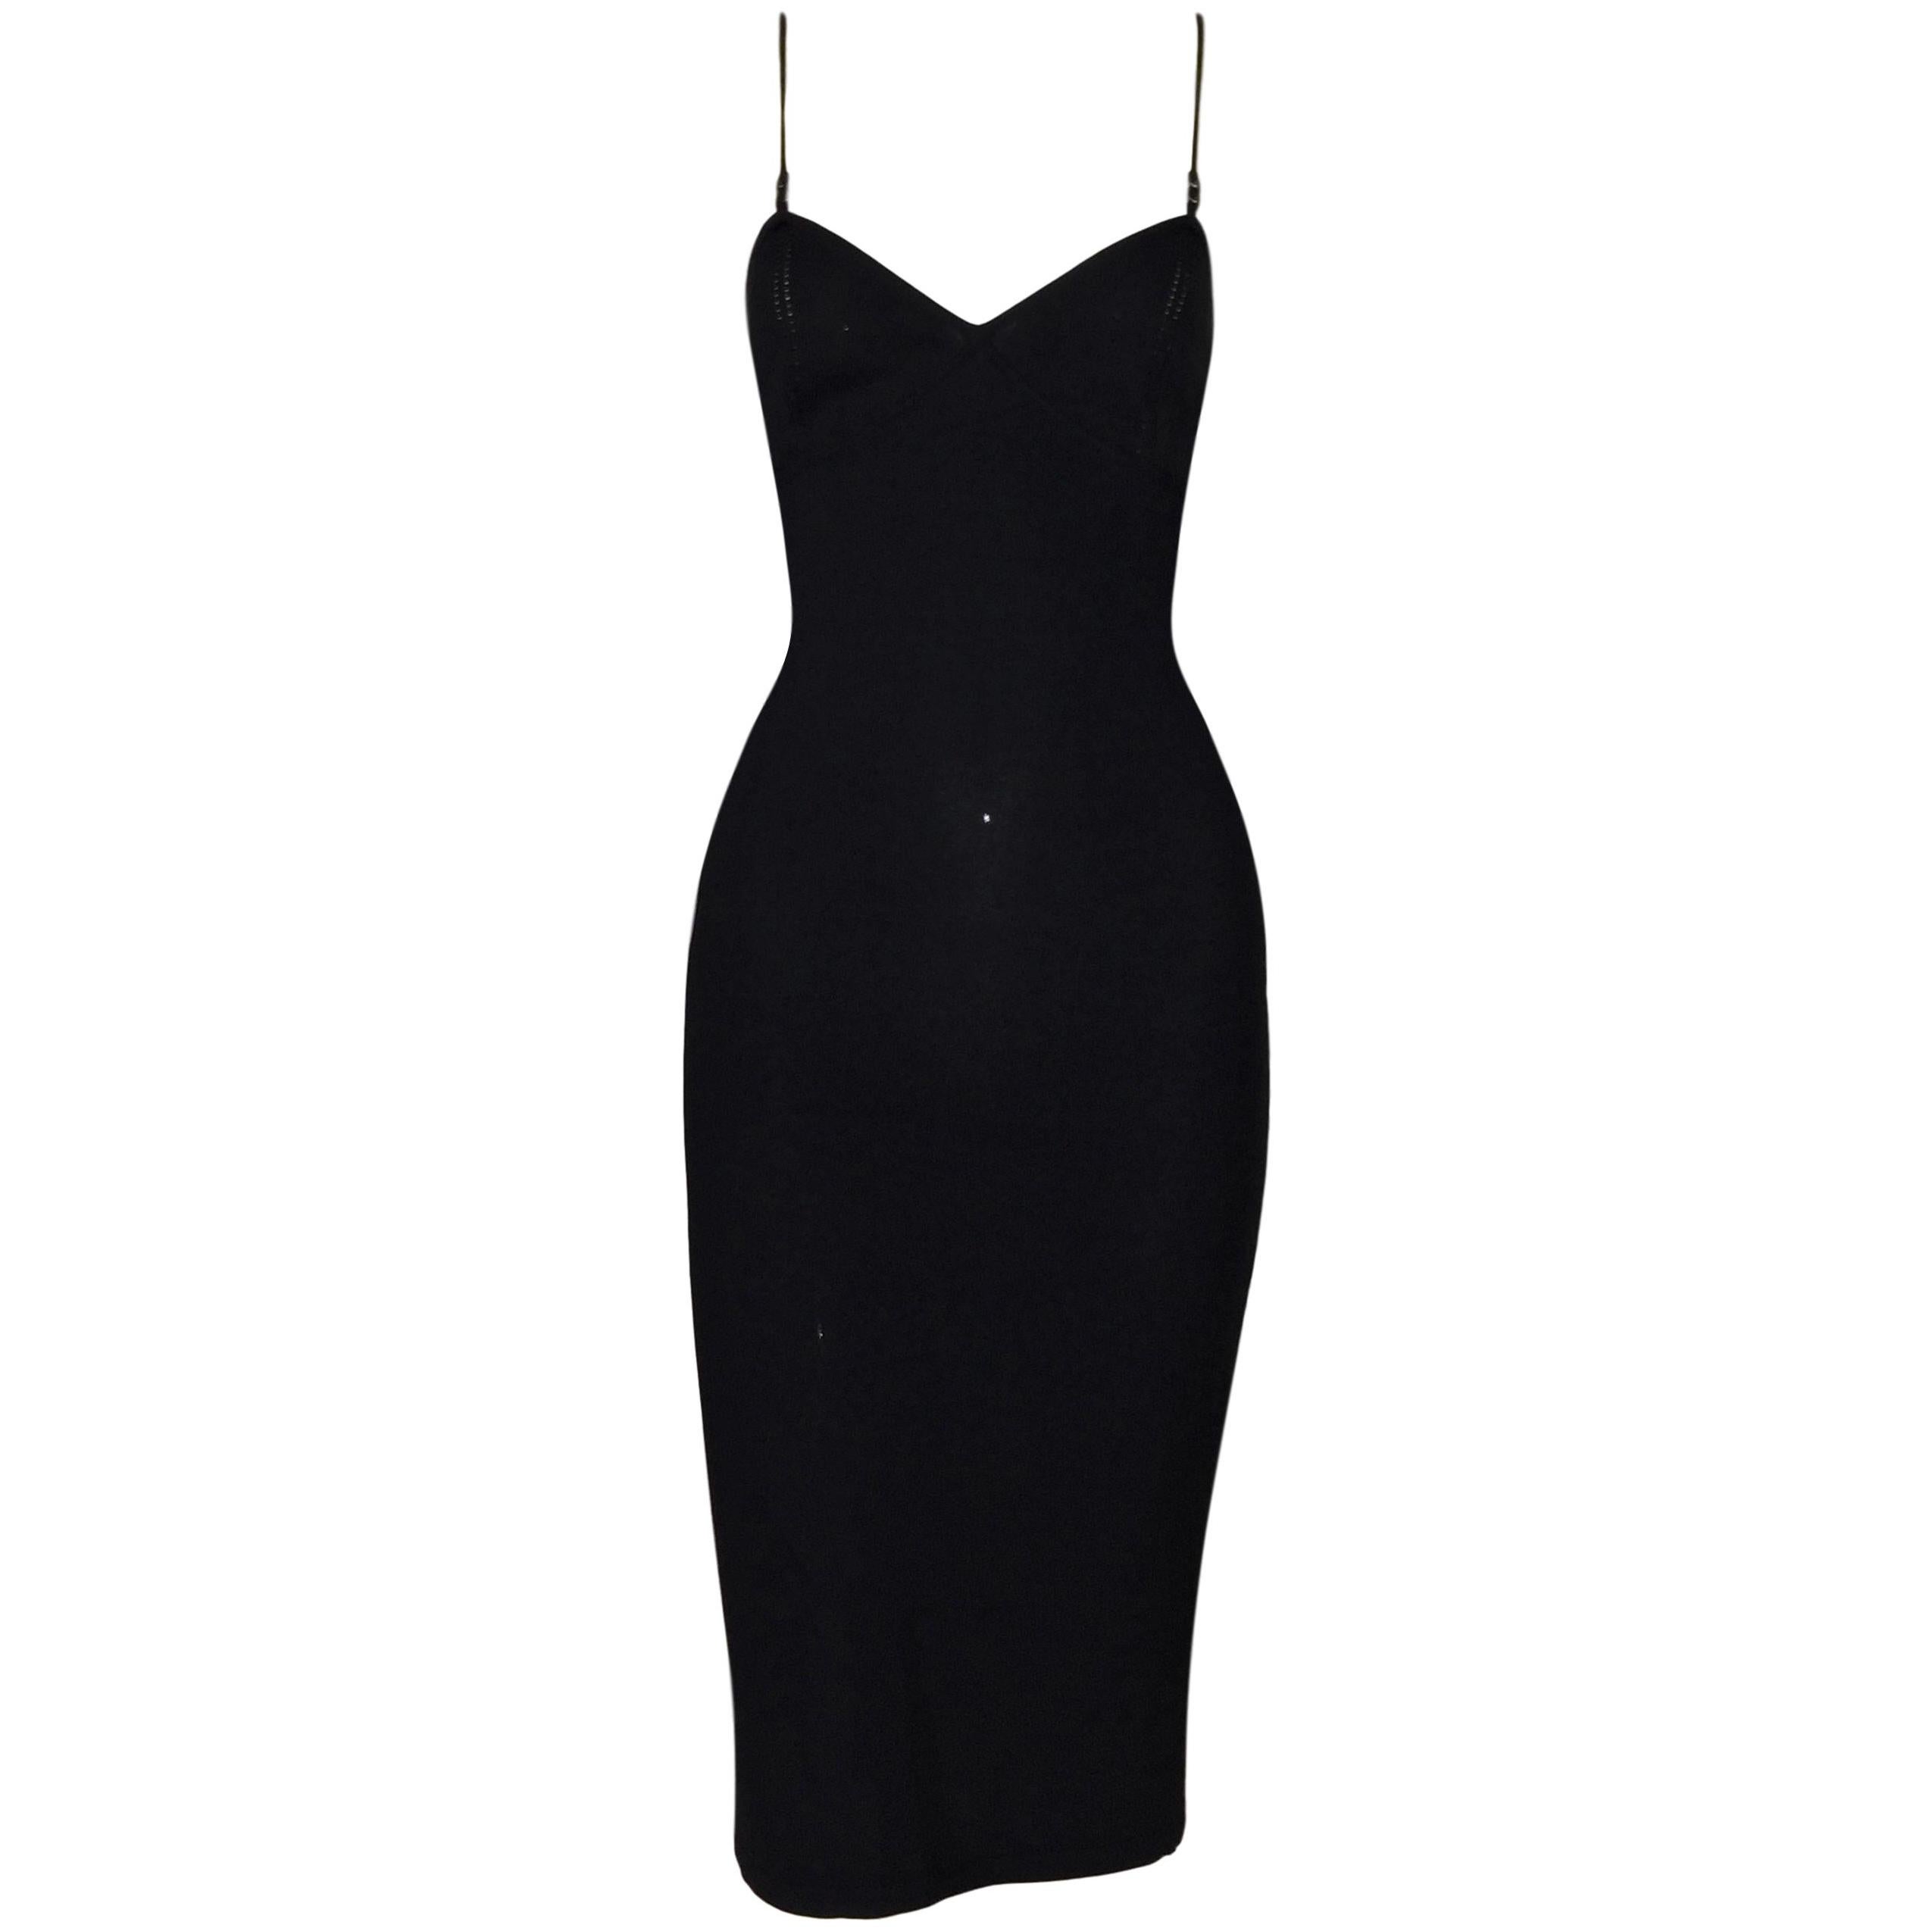 1999 Gucci by Tom Ford Plunging Black Slinky Bodycon Knit Dress M